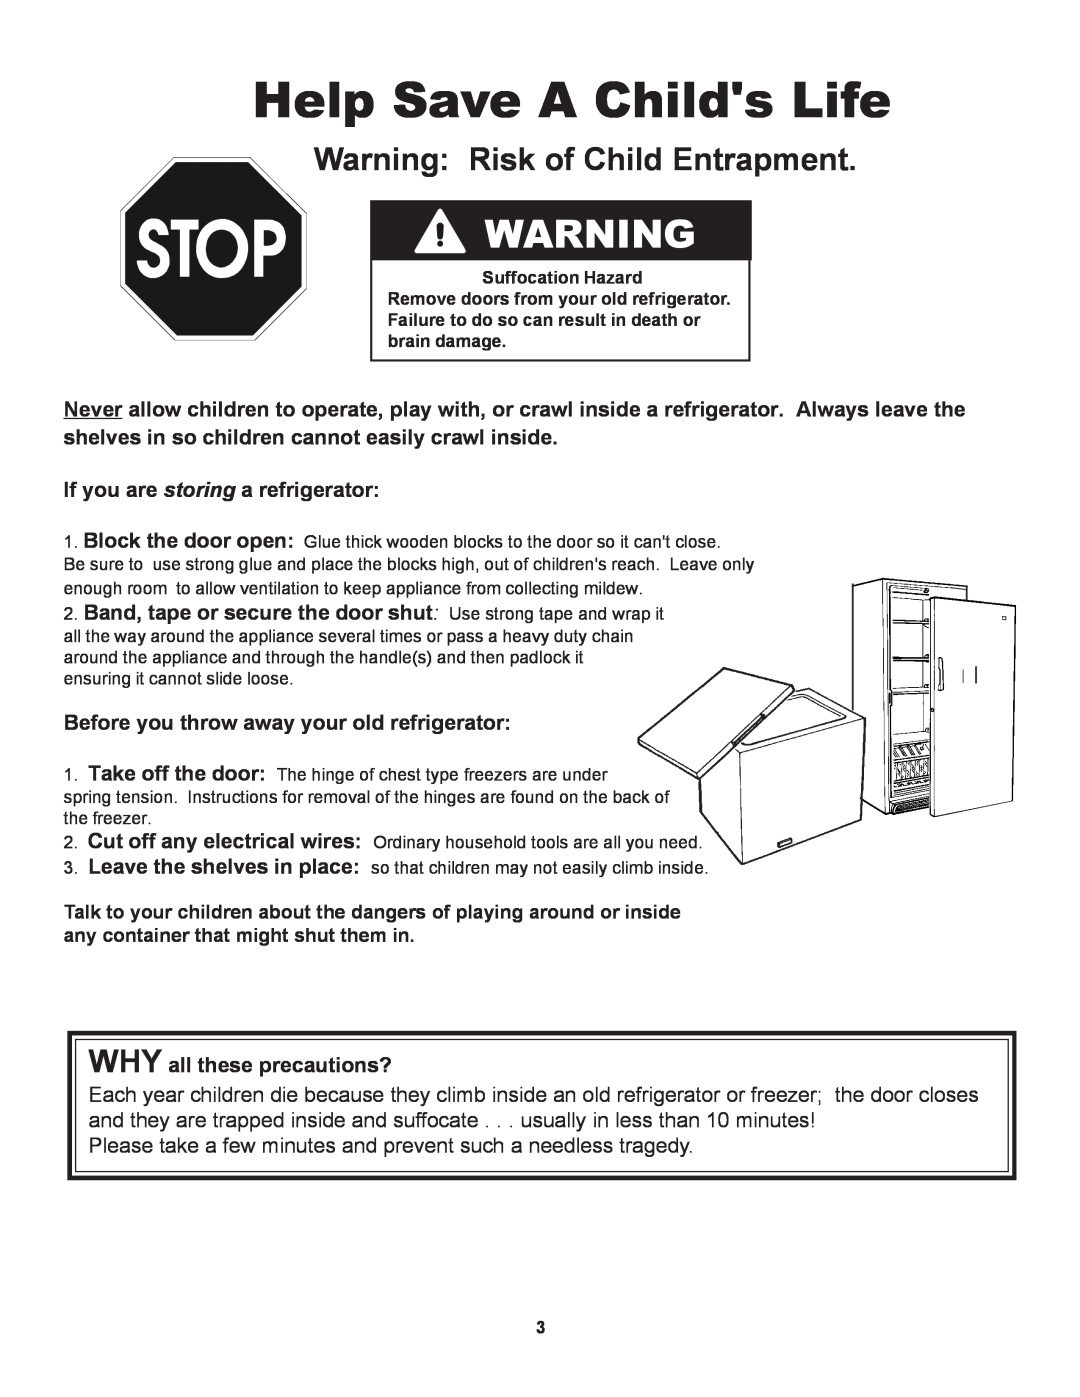 Danby D1866WE manual If you are storing a refrigerator, Band, tape or secure the door shut Use strong tape and wrap it 